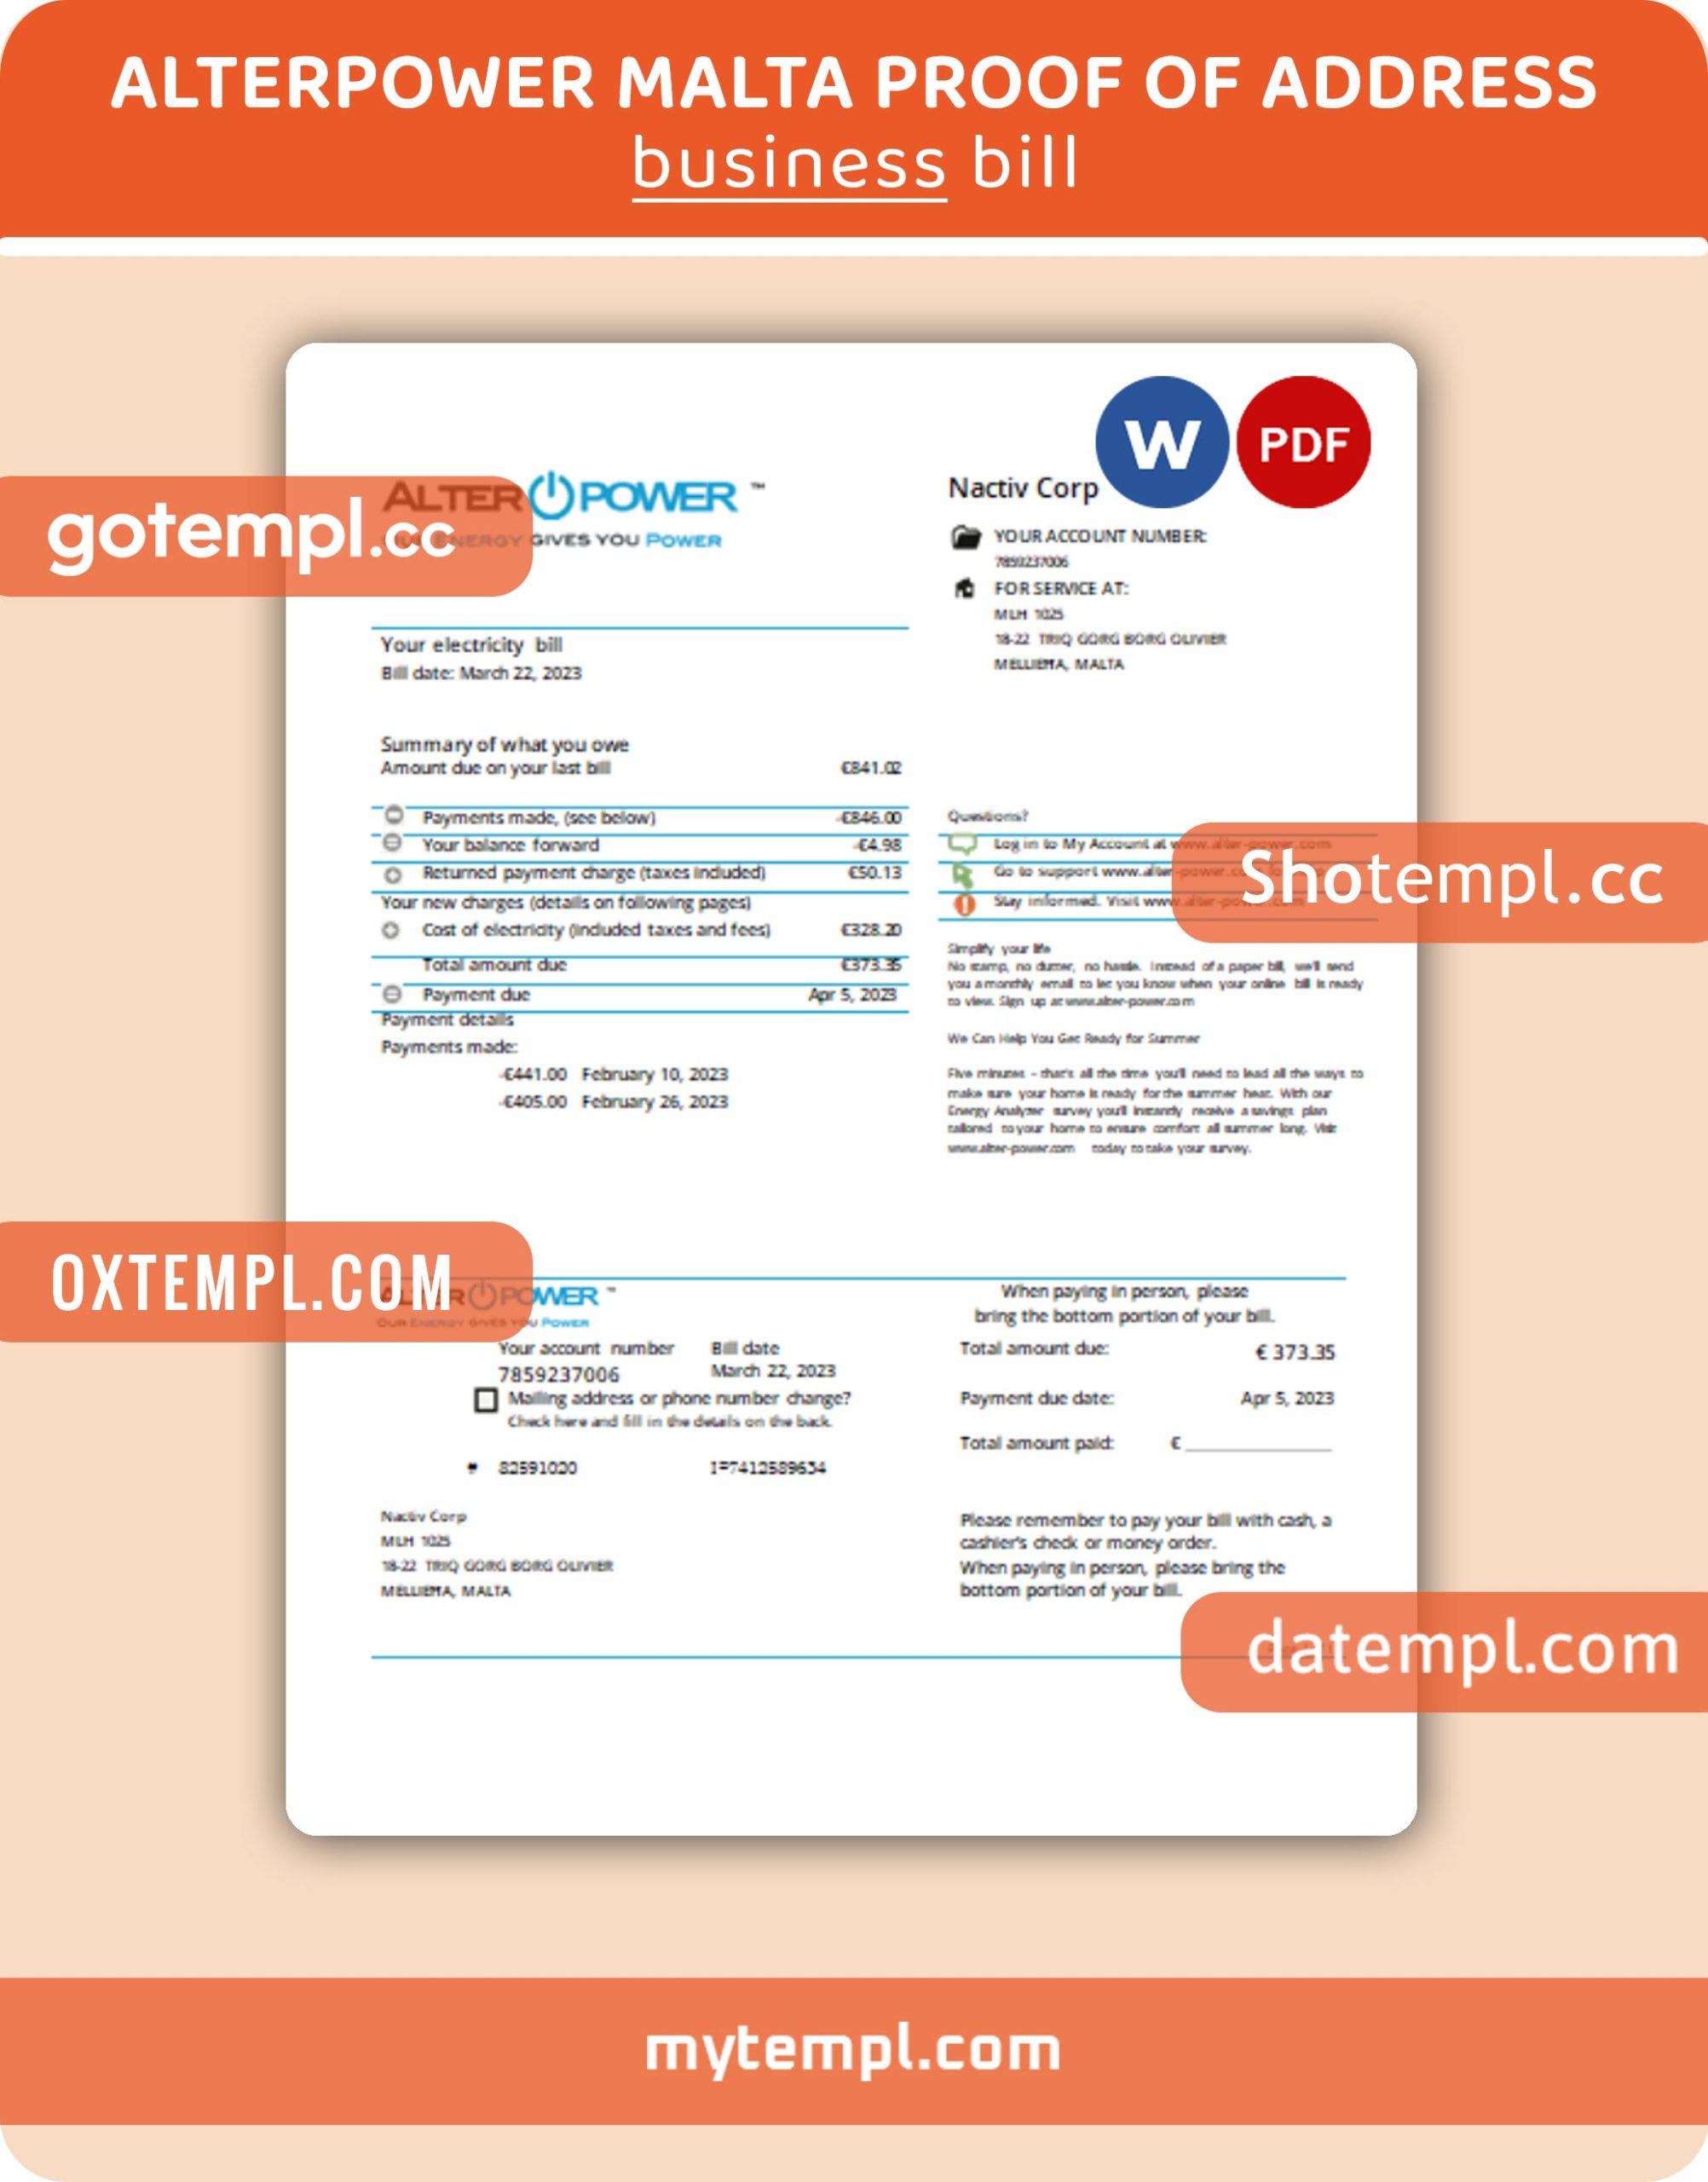 Switzerland Vitogaz Switzerland AG utility bill template, fully editable in Word and PDF format